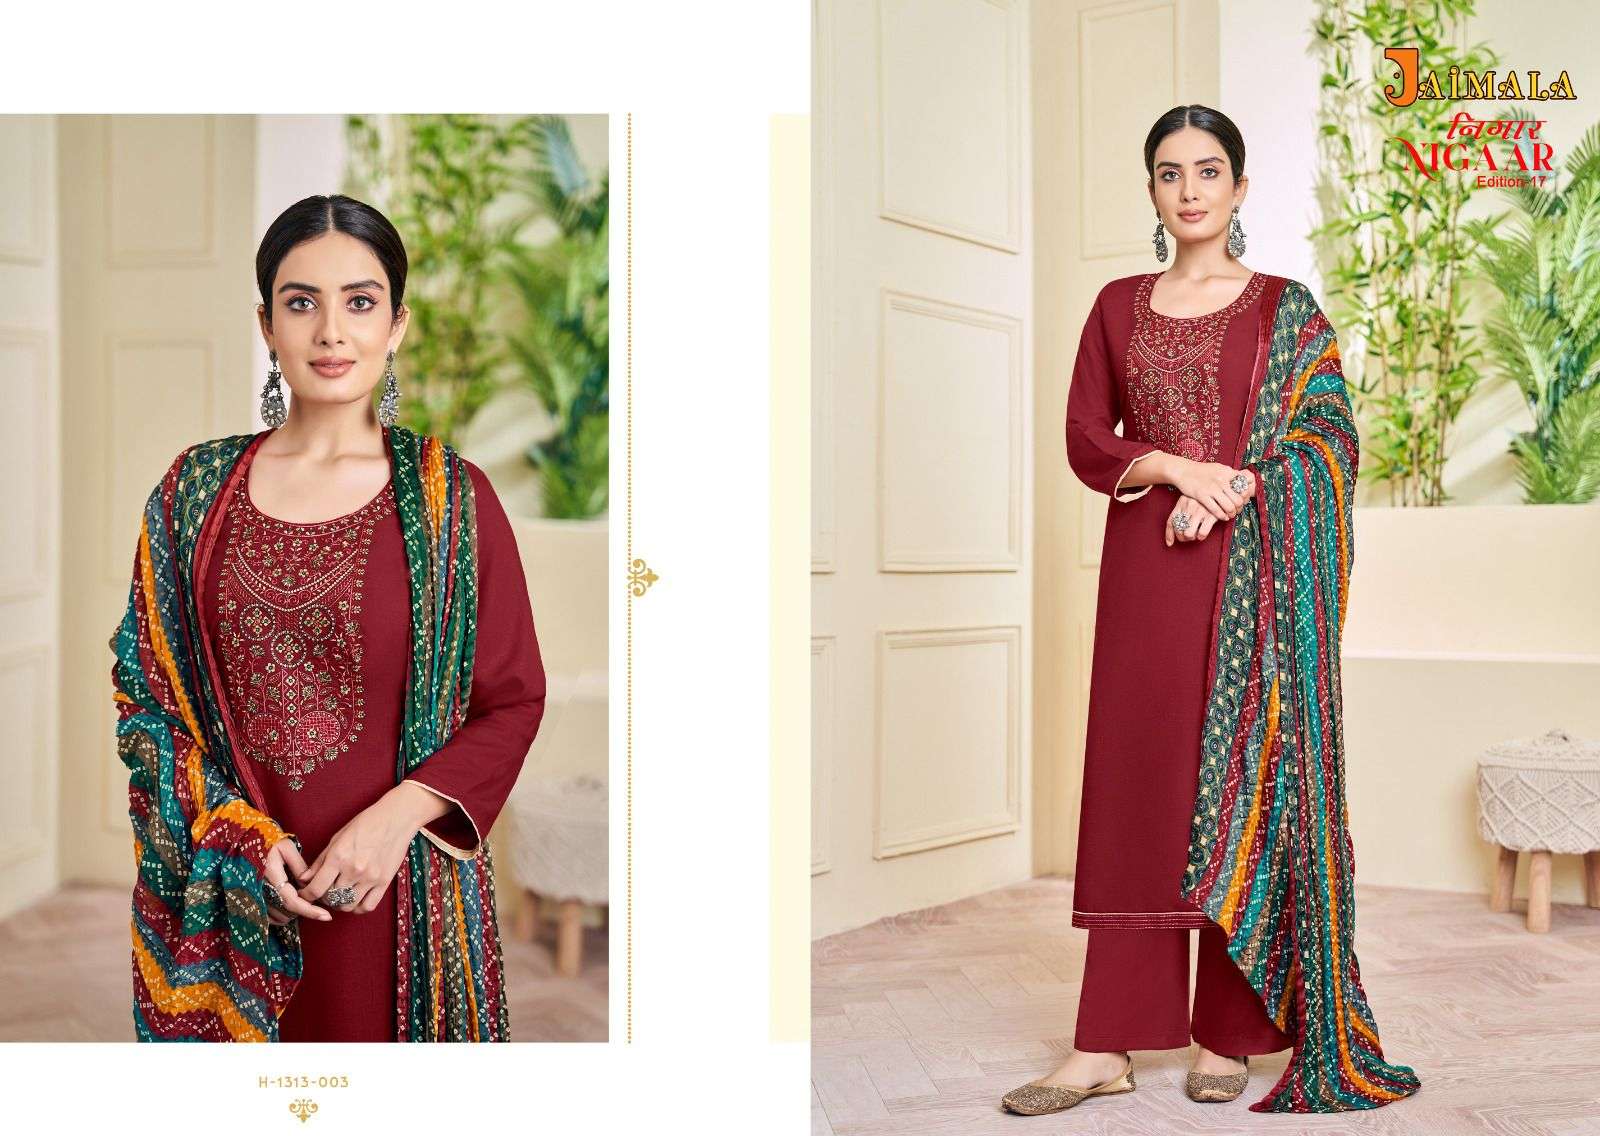 Nigaar Vol-17 By Jaimala 1313-001 To 1313-008 Series Beautiful Festive Suits Colorful Stylish Fancy Casual Wear & Ethnic Wear Pure Rayon Slub Embroidered Dresses At Wholesale Price